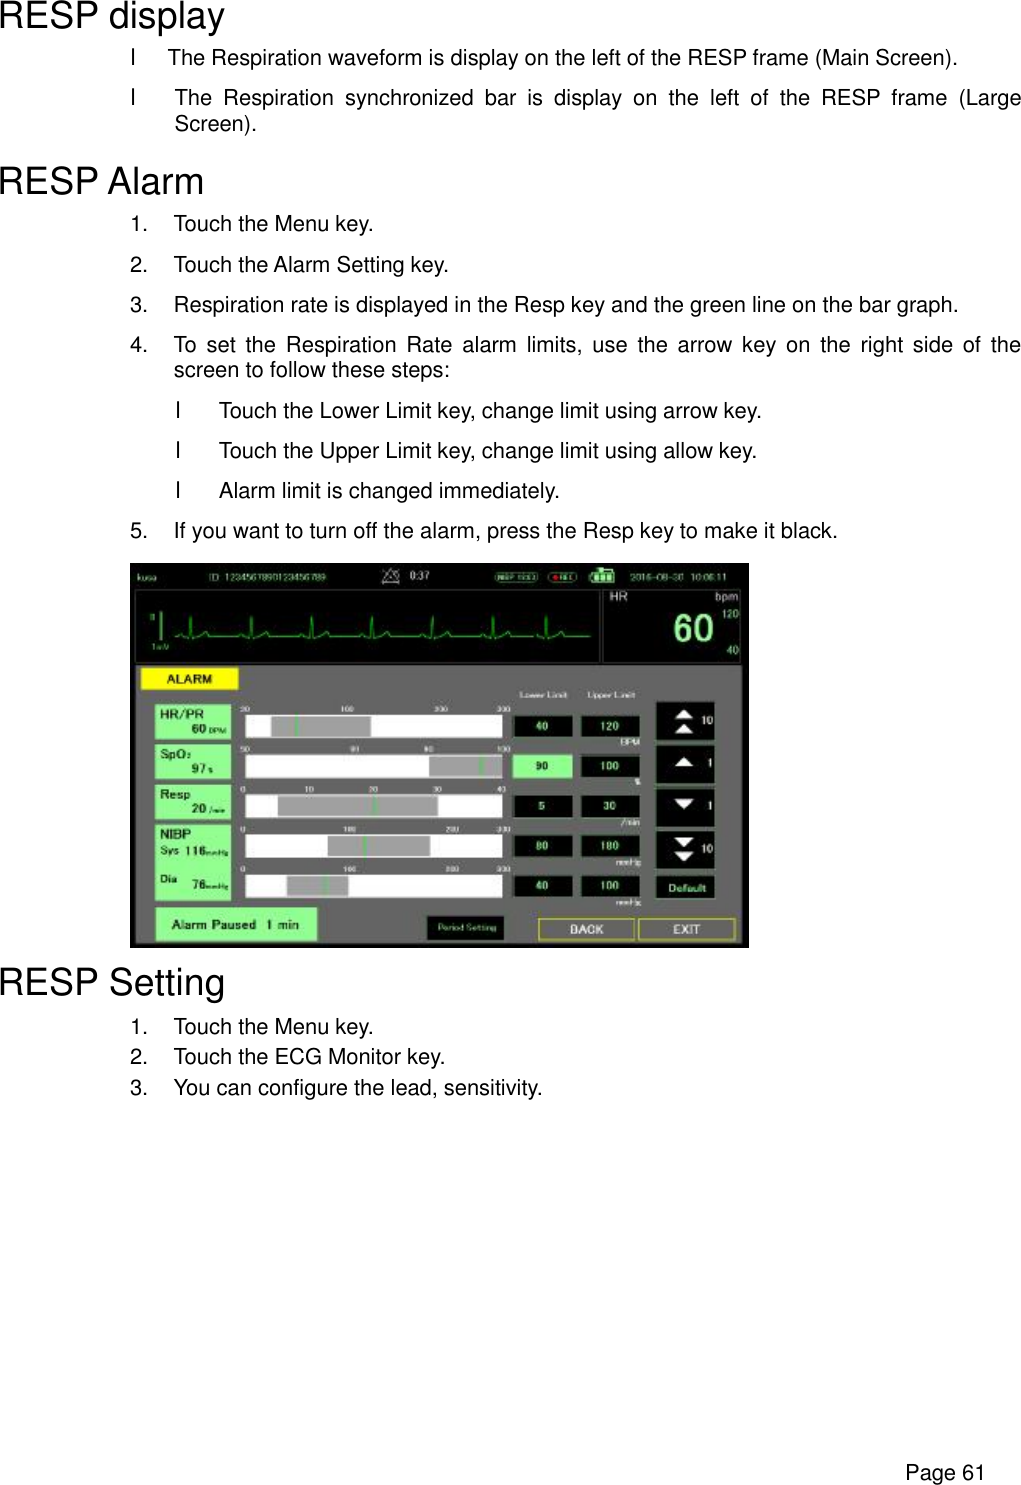      Page 61 RESP display l The Respiration waveform is display on the left of the RESP frame (Main Screen). l The Respiration synchronized bar is display on the left of the RESP frame (Large Screen). RESP Alarm 1. Touch the Menu key. 2. Touch the Alarm Setting key. 3. Respiration rate is displayed in the Resp key and the green line on the bar graph. 4. To set the Respiration Rate alarm limits, use the arrow key on the right side of the screen to follow these steps: l Touch the Lower Limit key, change limit using arrow key. l Touch the Upper Limit key, change limit using allow key. l Alarm limit is changed immediately. 5. If you want to turn off the alarm, press the Resp key to make it black.  RESP Setting 1. Touch the Menu key. 2. Touch the ECG Monitor key. 3. You can configure the lead, sensitivity. 